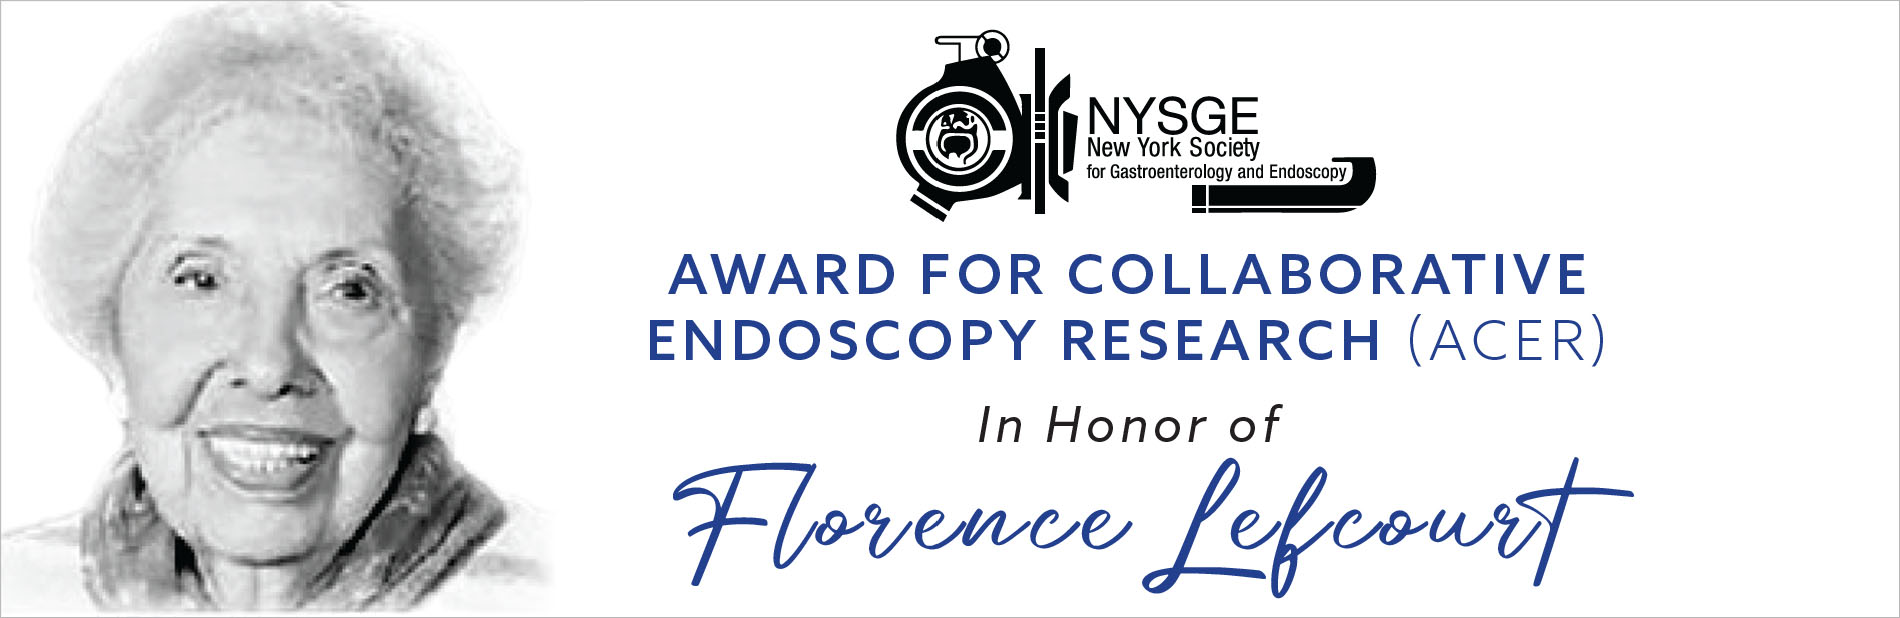 NYSGE New York Society for Gastroenterology and Endoscopy. Award for Collaborative Endoscopy Research (ACER). In honor of Florence Lefcourt.